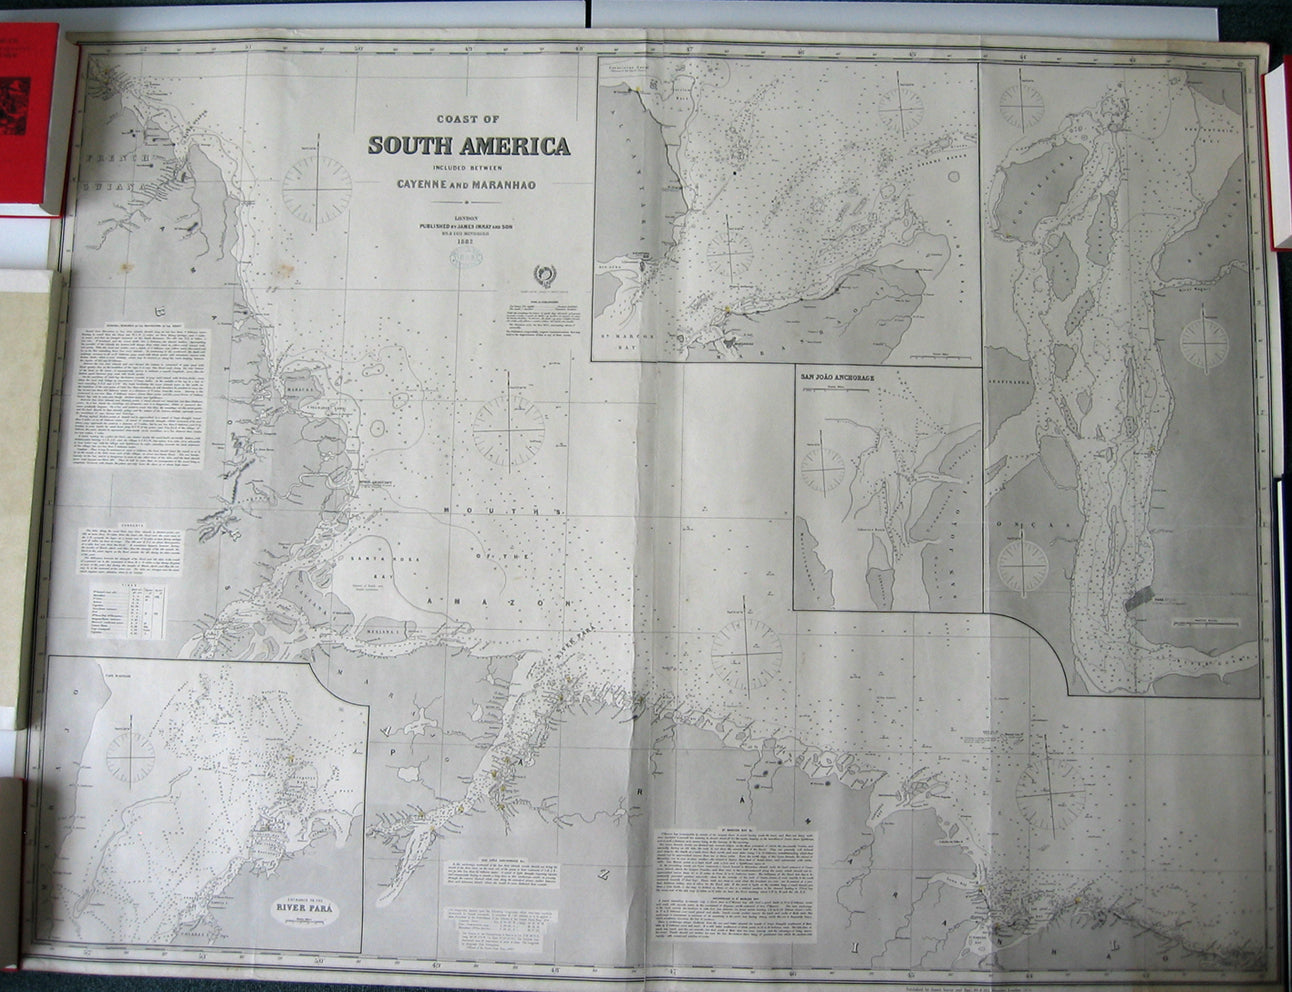 James Imray & Son: Coast of South America included between Cayenne and Maranhao, 1882 [Blueback sea chart]